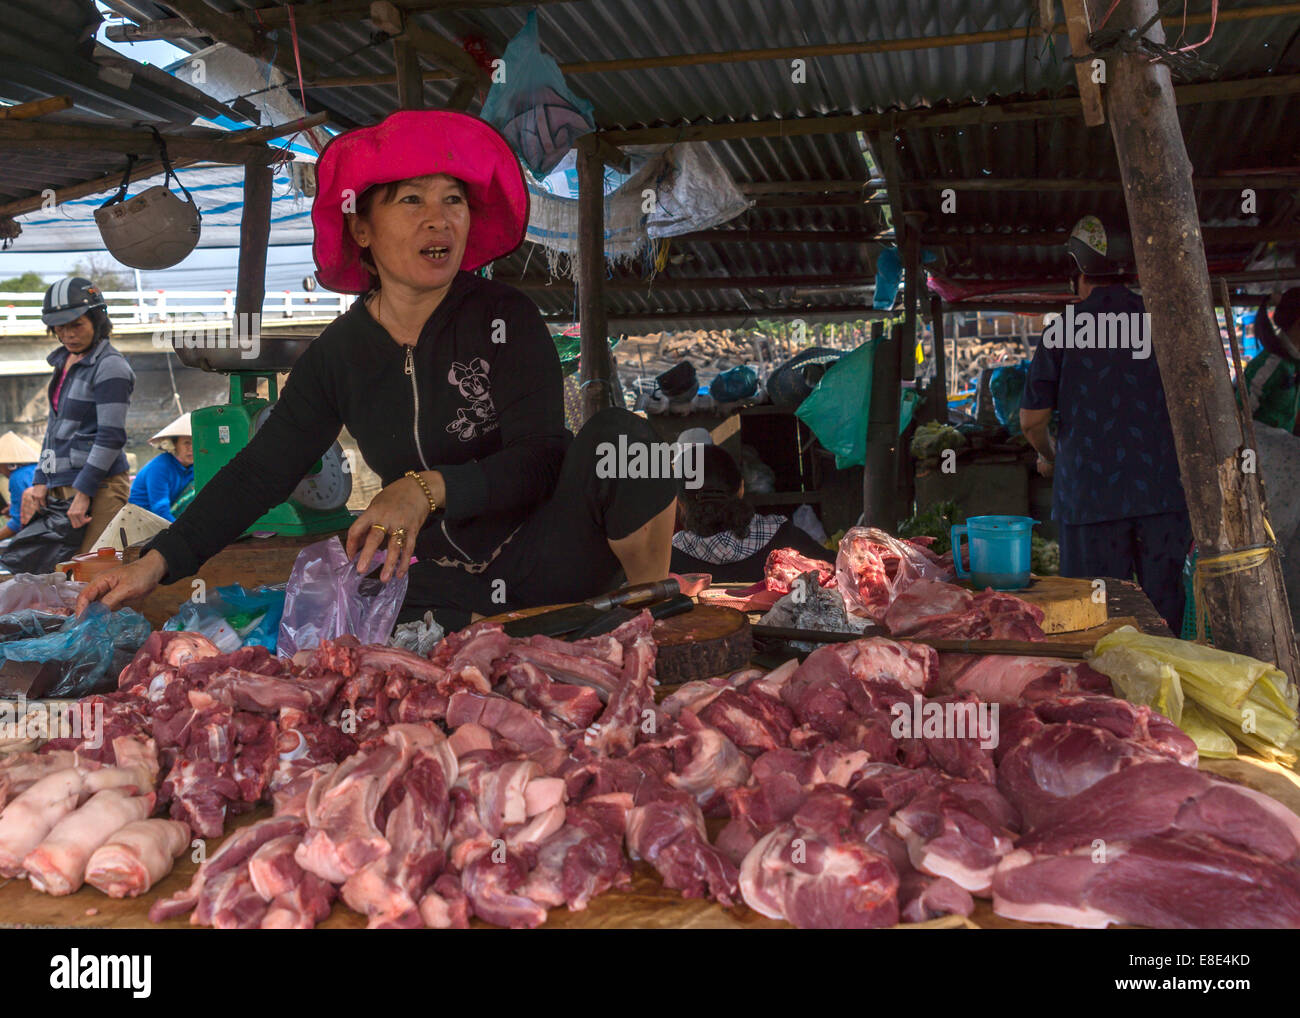 A female butcher sells her pieces of fresh cut meat in a simple booth at the market. Stock Photo